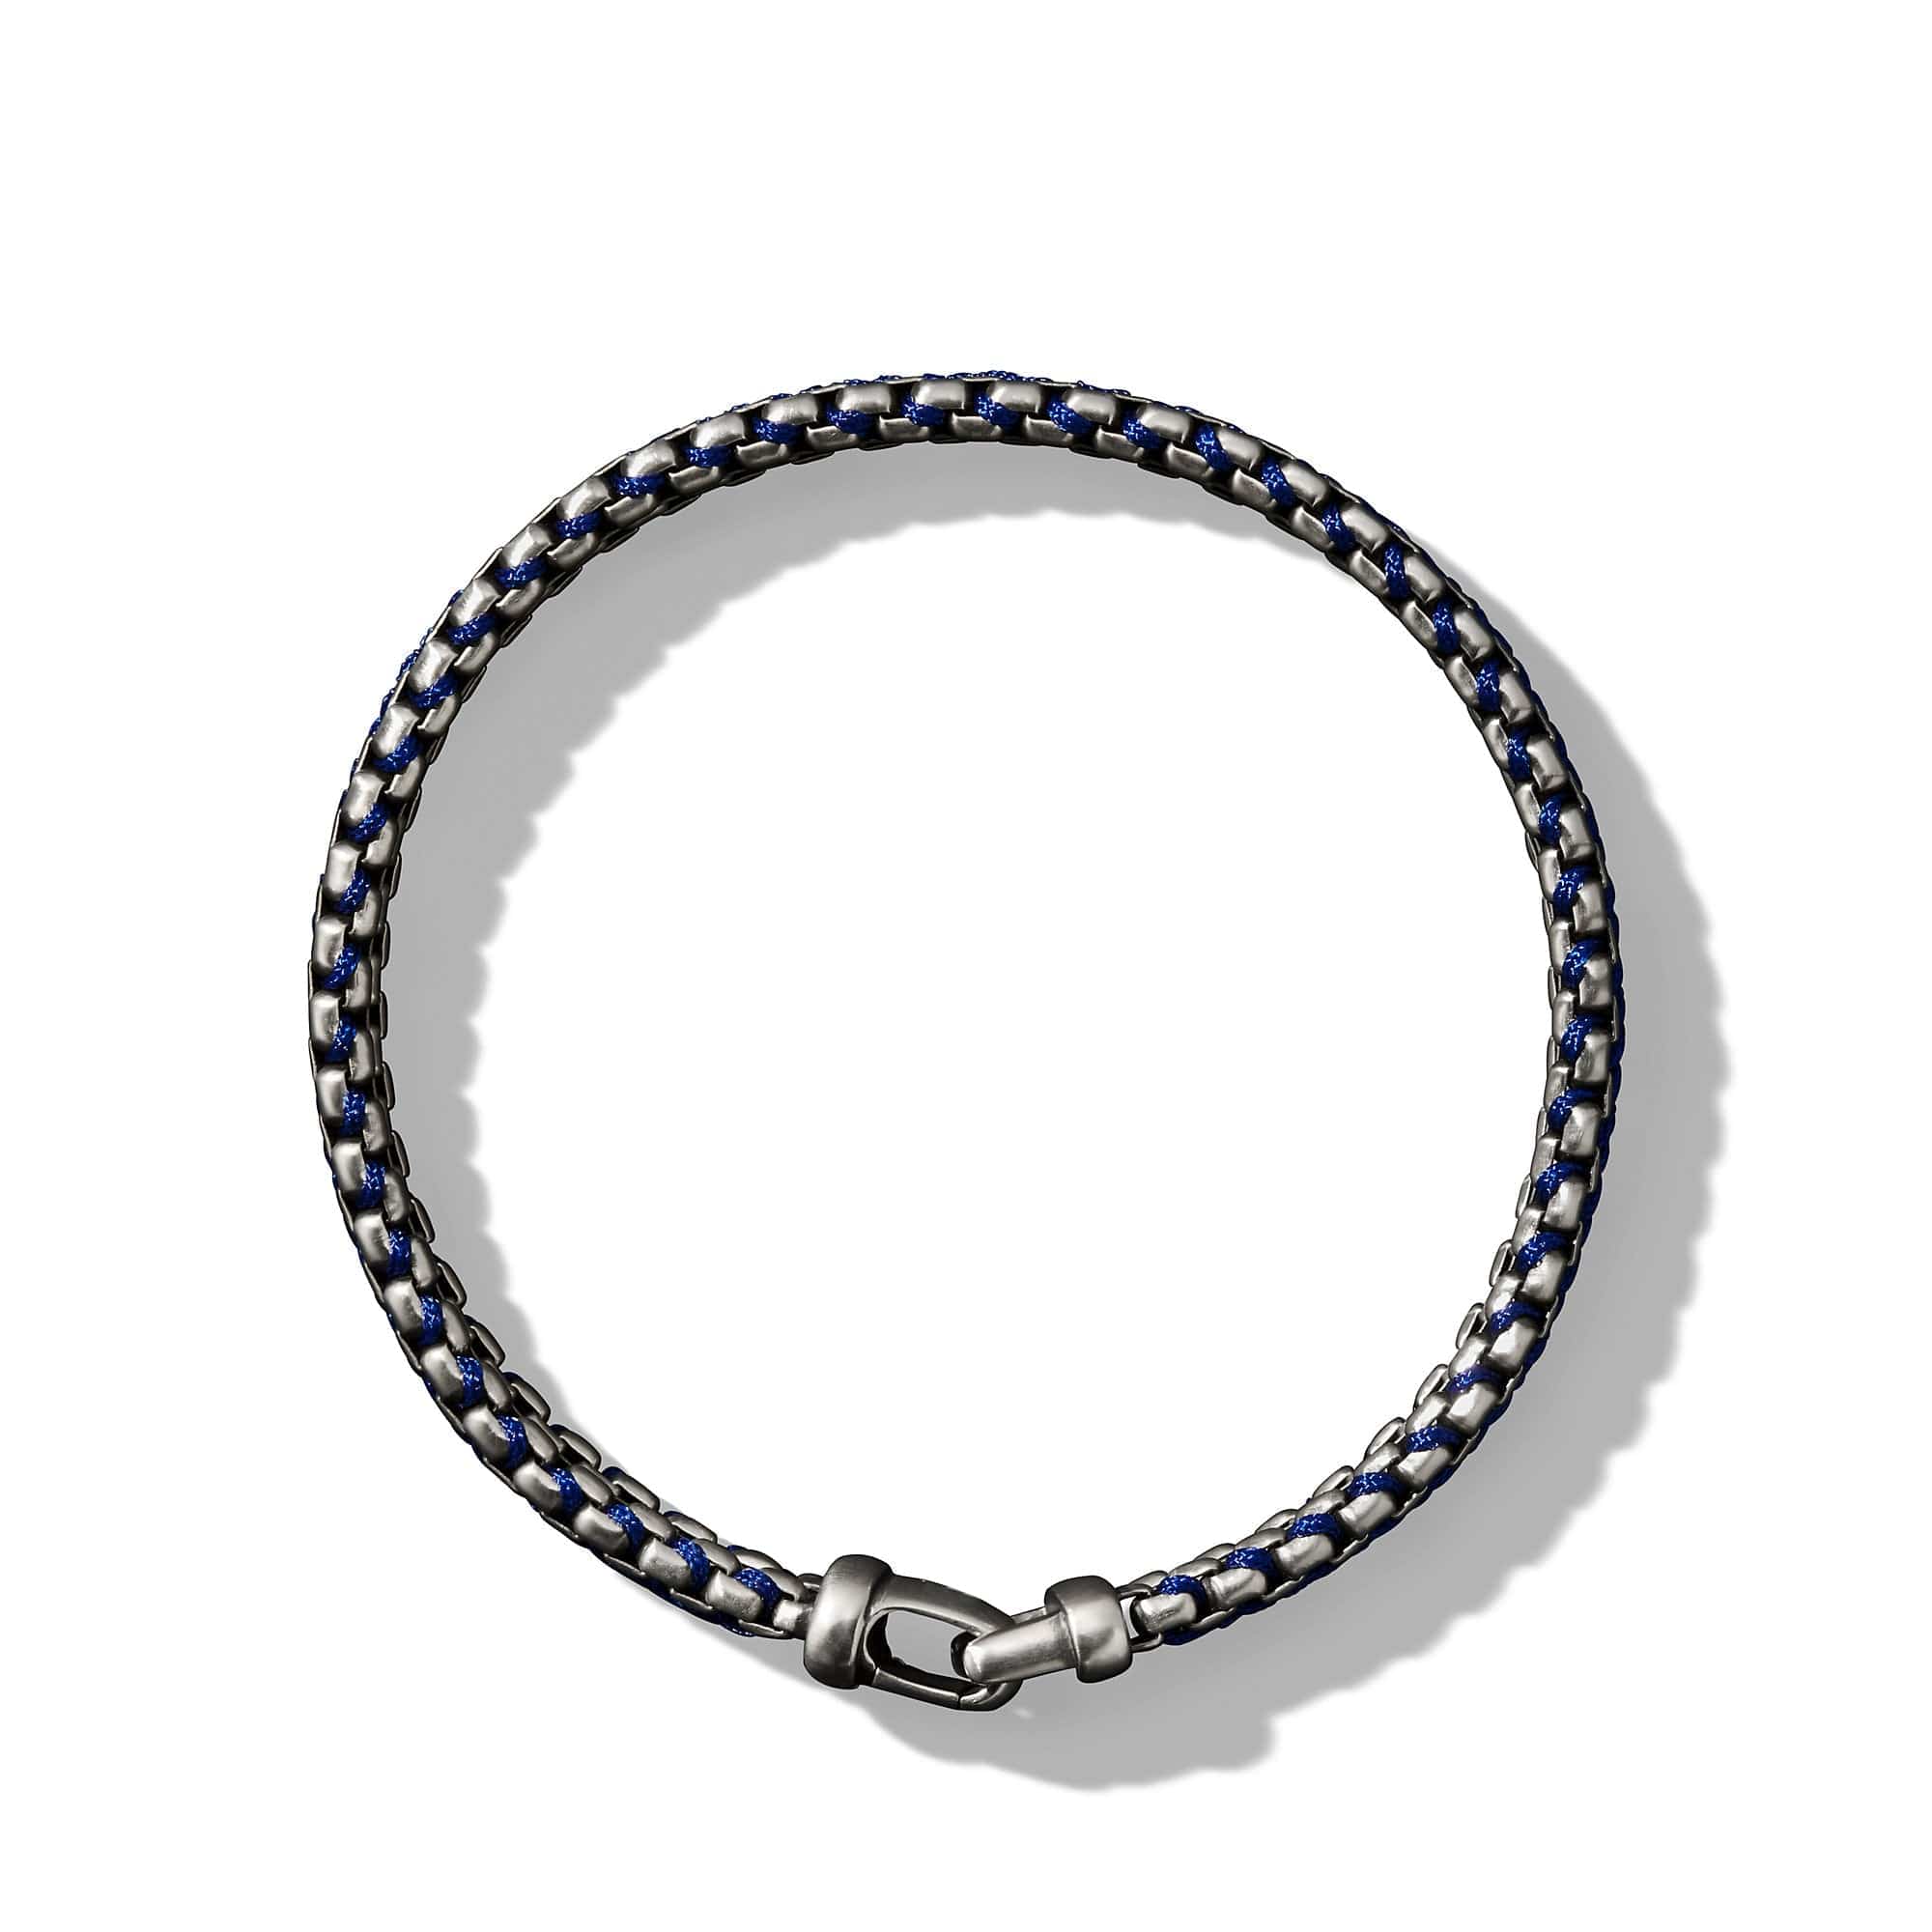 Woven Box Chain Bracelet in Sterling Silver with Black Stainless